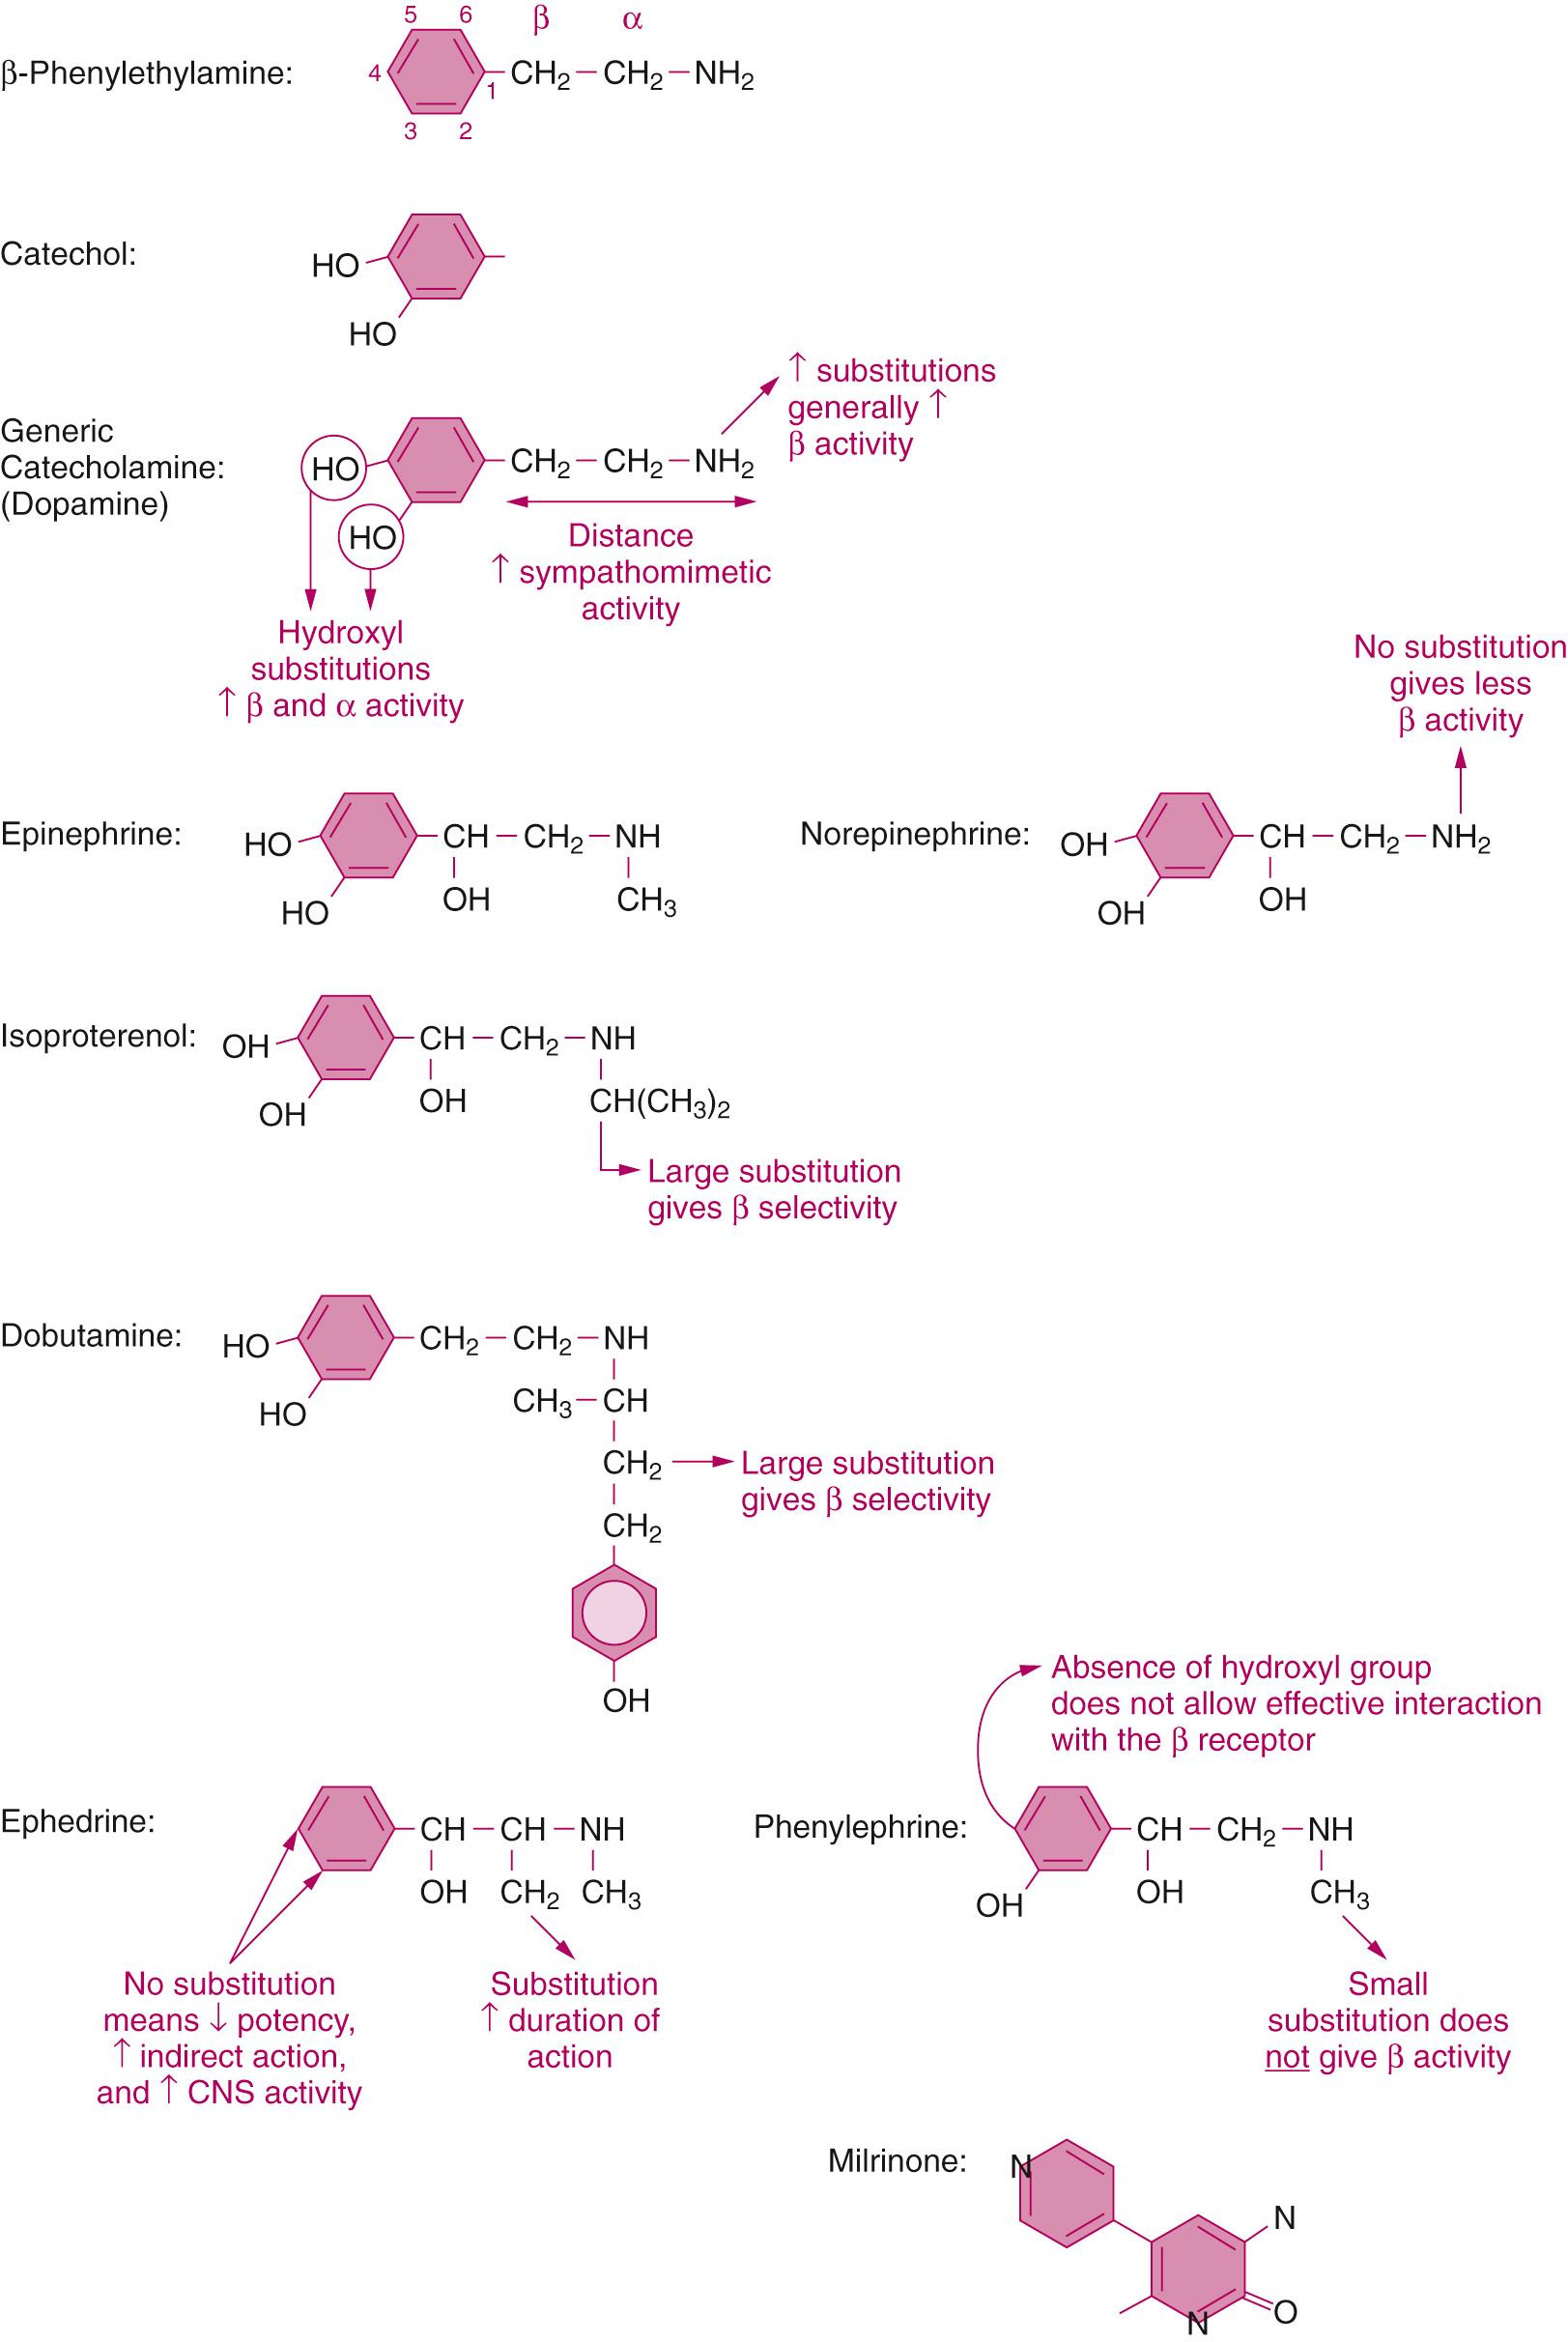 Fig. 25.1, The chemical structure of selected sympathomimetic agents. Most are chemically related as catecholamines. Milrinone is a notable exception.